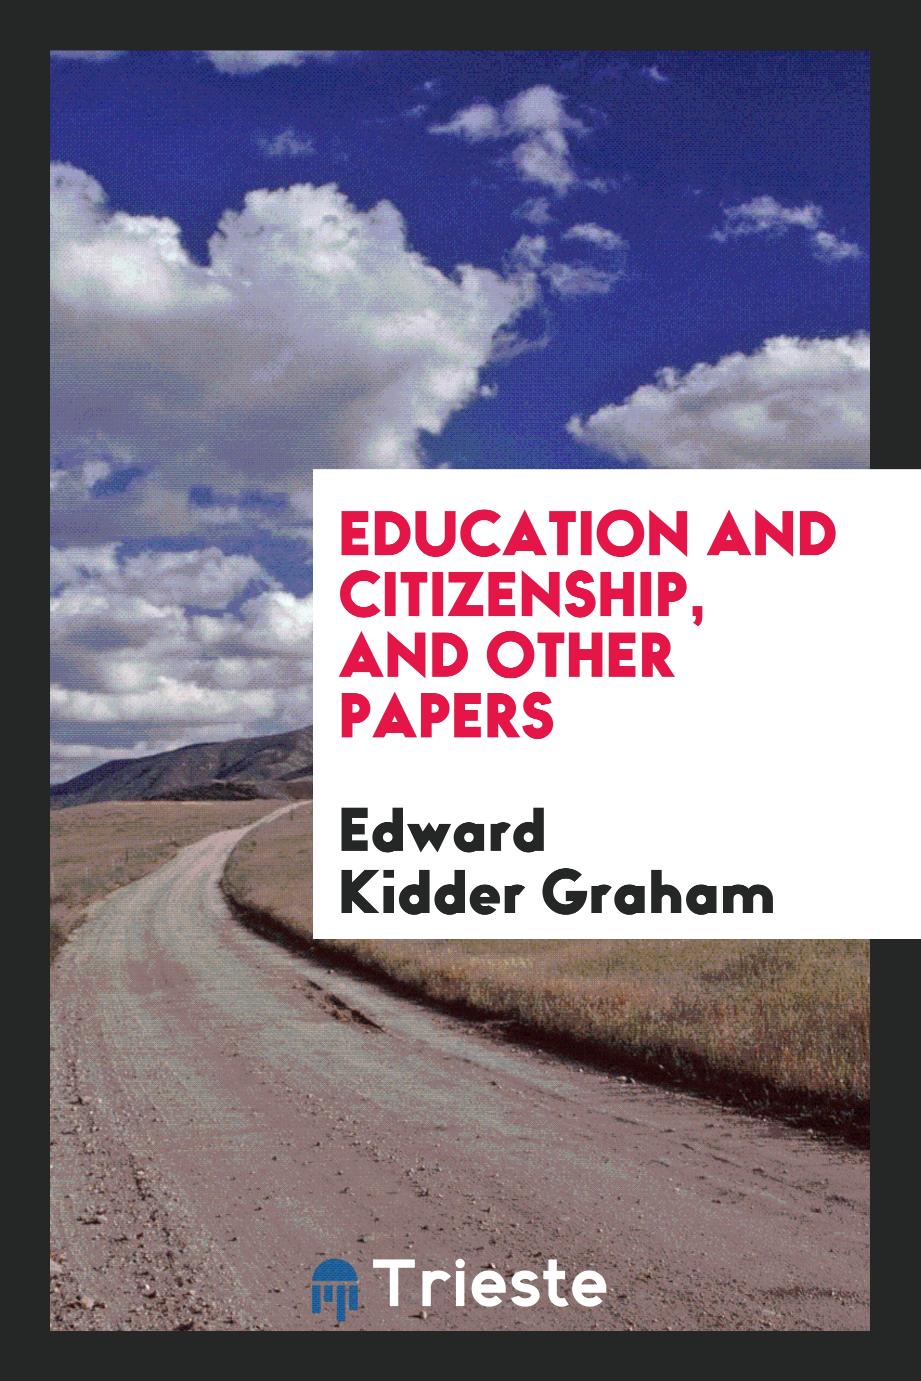 Education and citizenship, and other papers